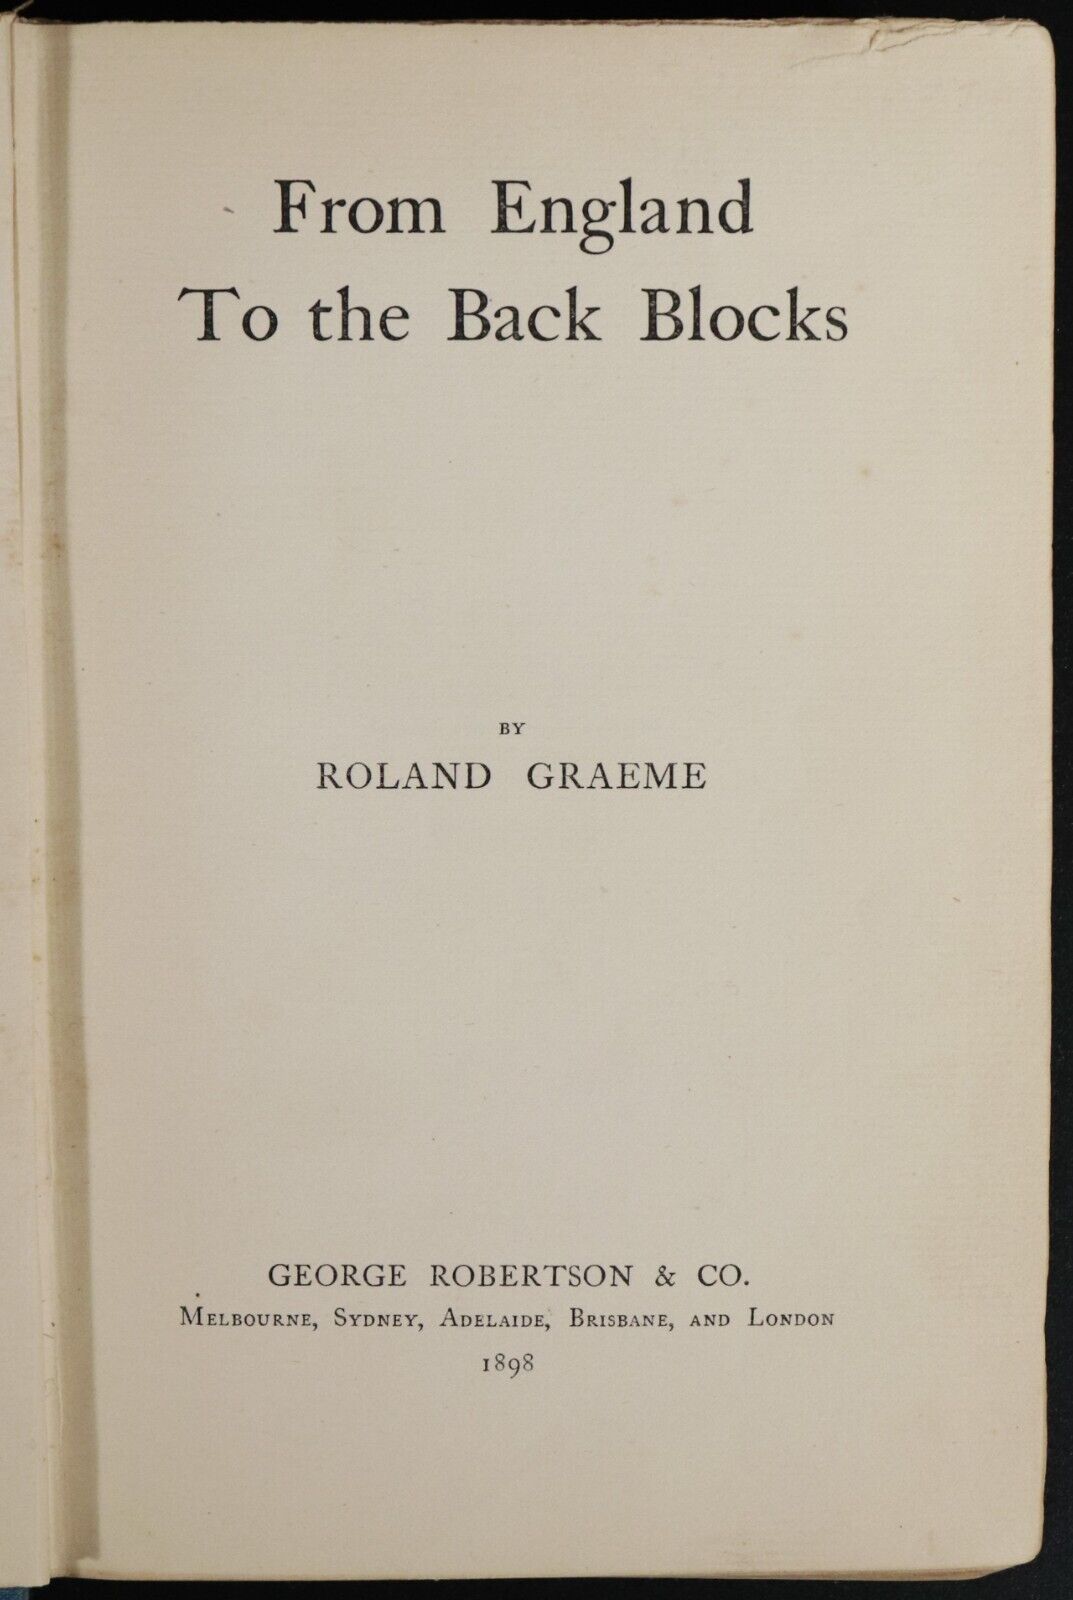 1898 From England To The Back Blocks by Roland Graeme Australian Fiction Book - 0